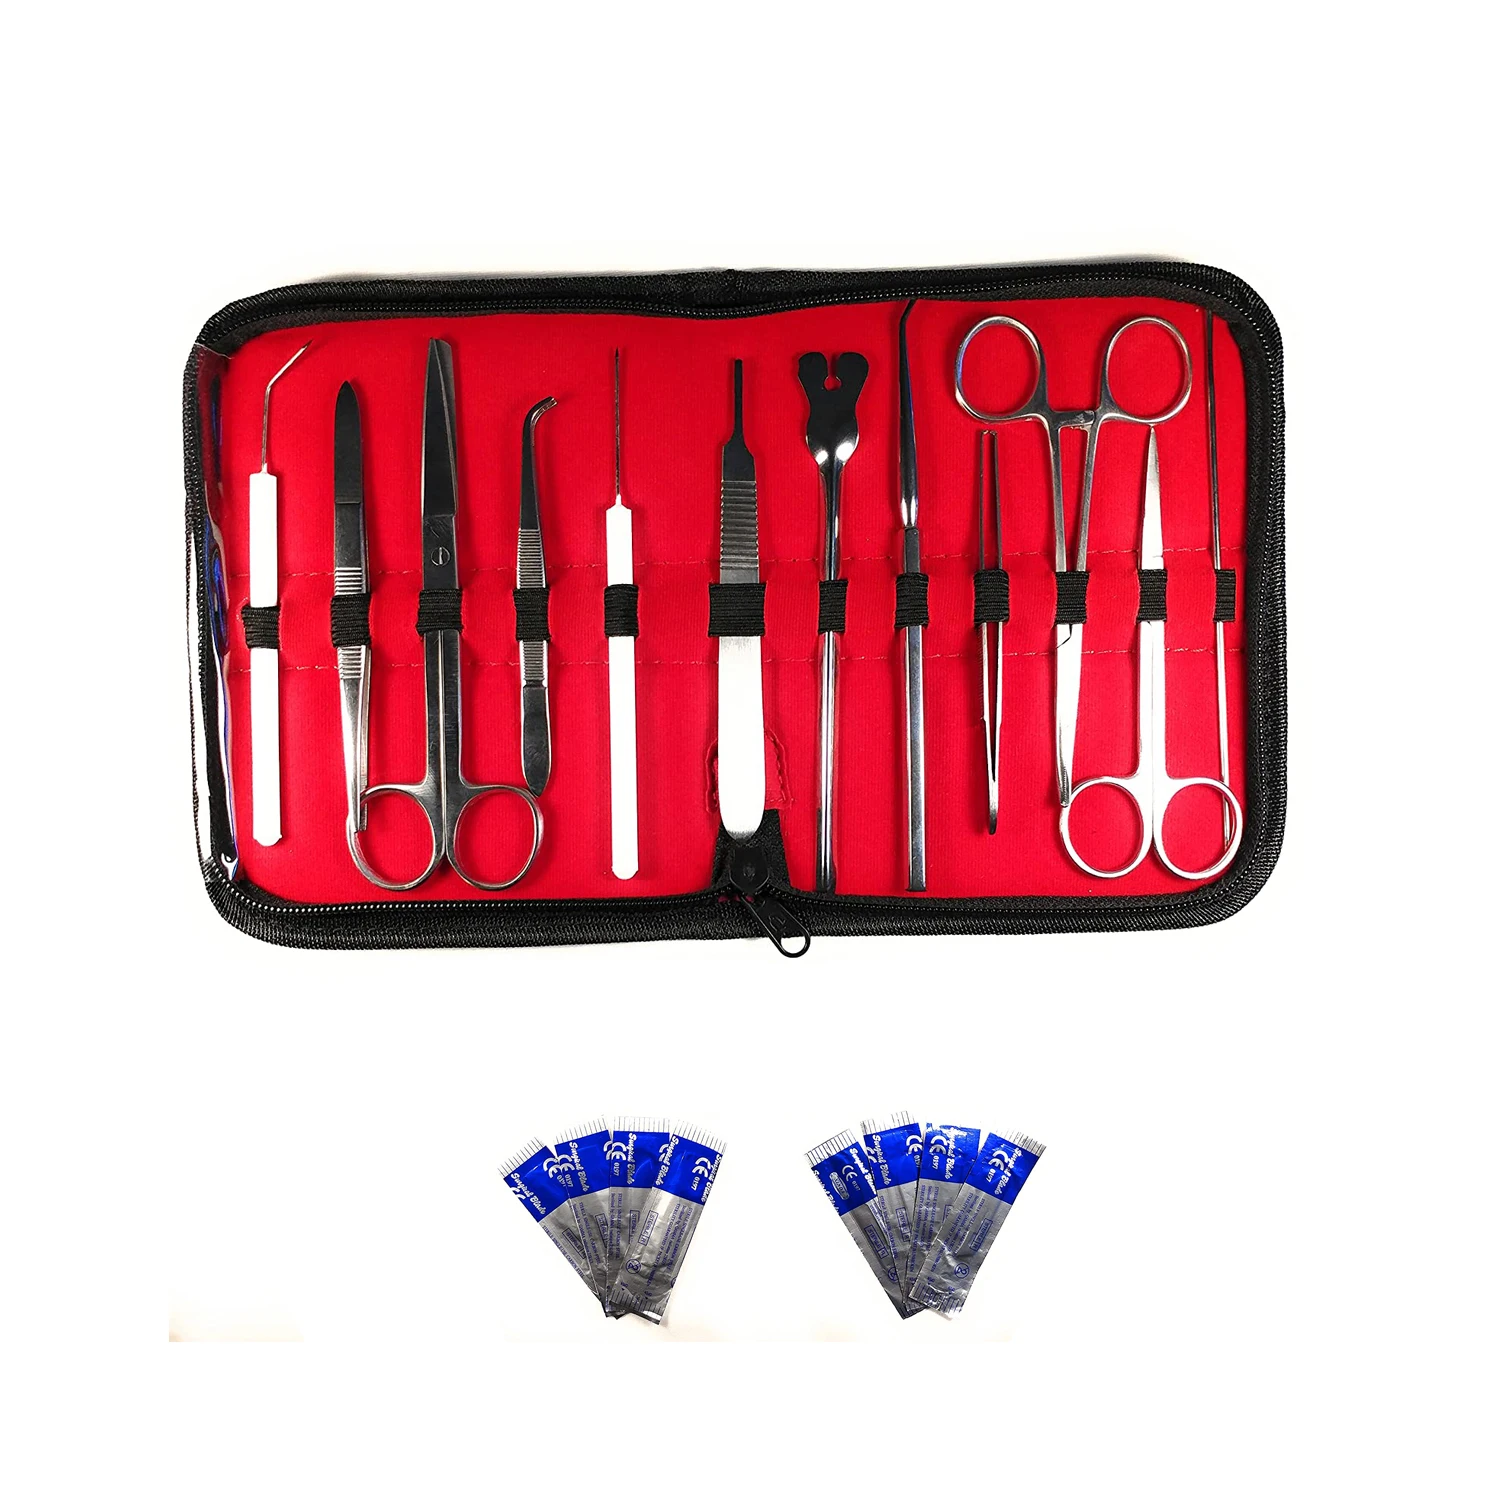 Biological Surgical Dissection Kit Stainless Steel 